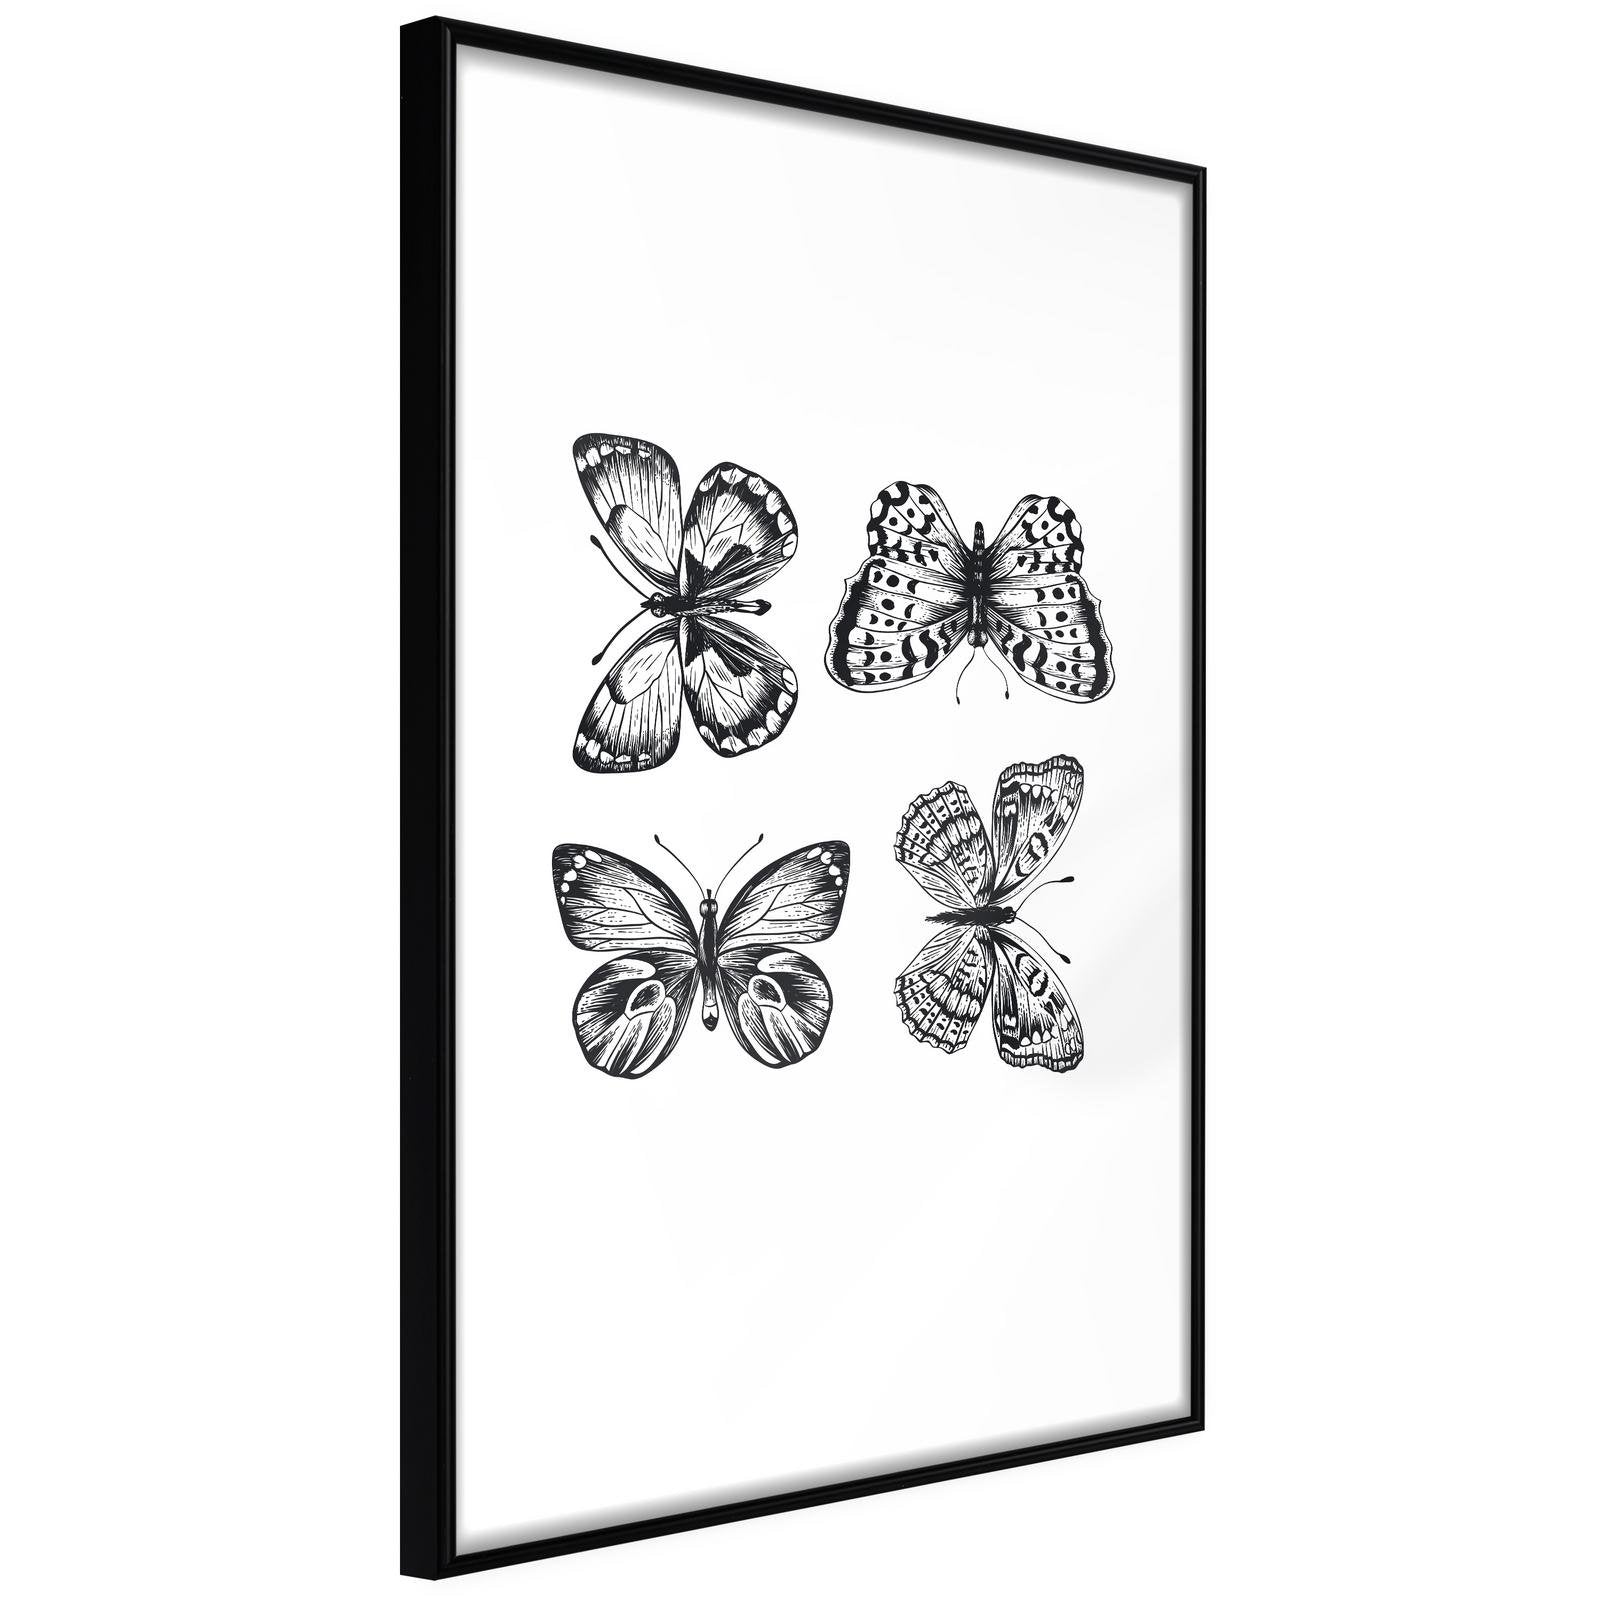 Inramad Poster / Tavla - Butterfly Collection III-Poster Inramad-Artgeist-20x30-Svart ram-peaceofhome.se